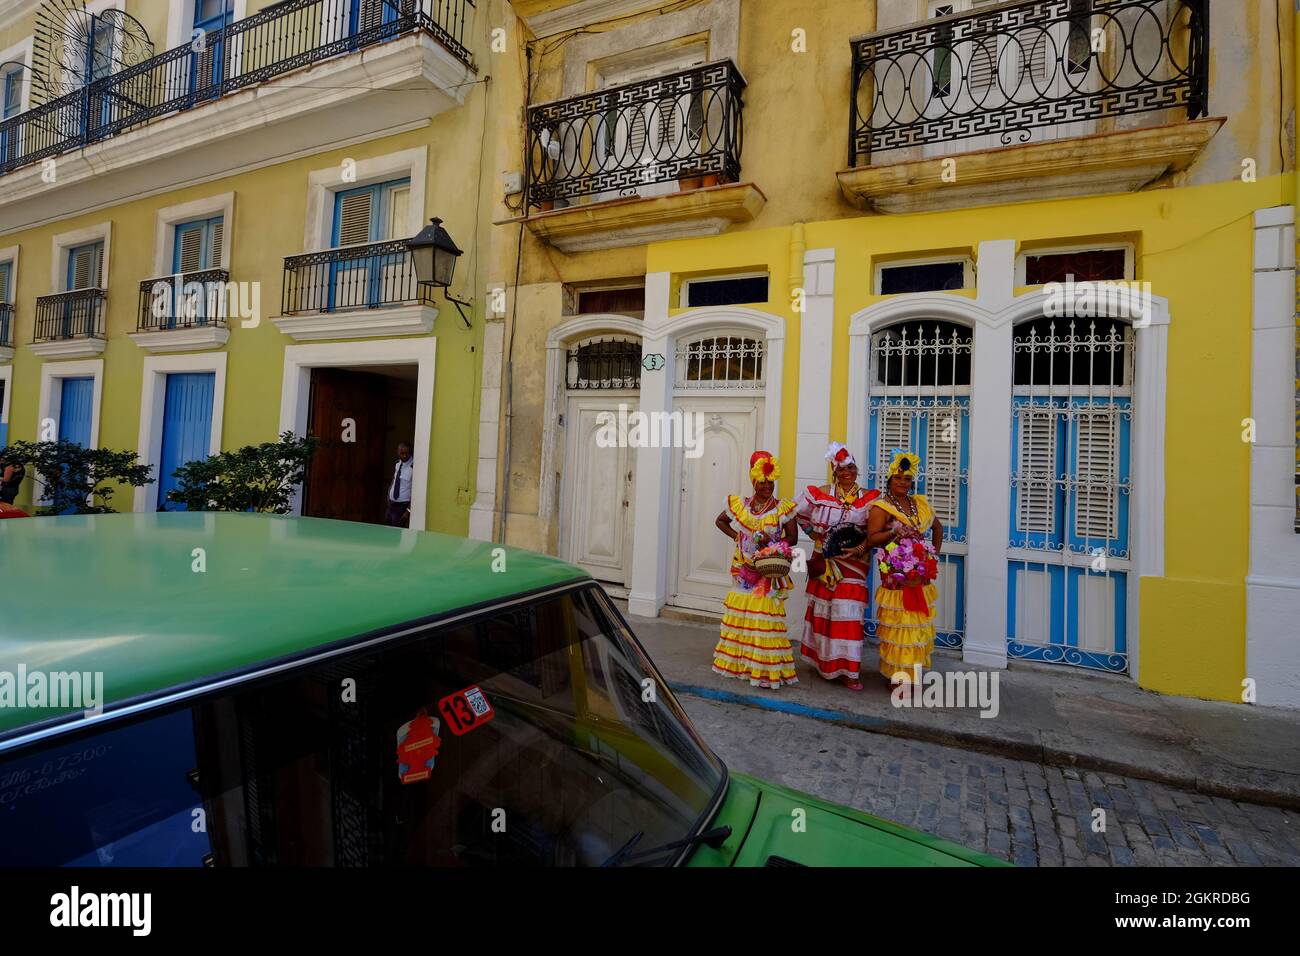 Three colorful ladies in traditional dress, Old Havana, Cuba, West Indies, Central America Stock Photo